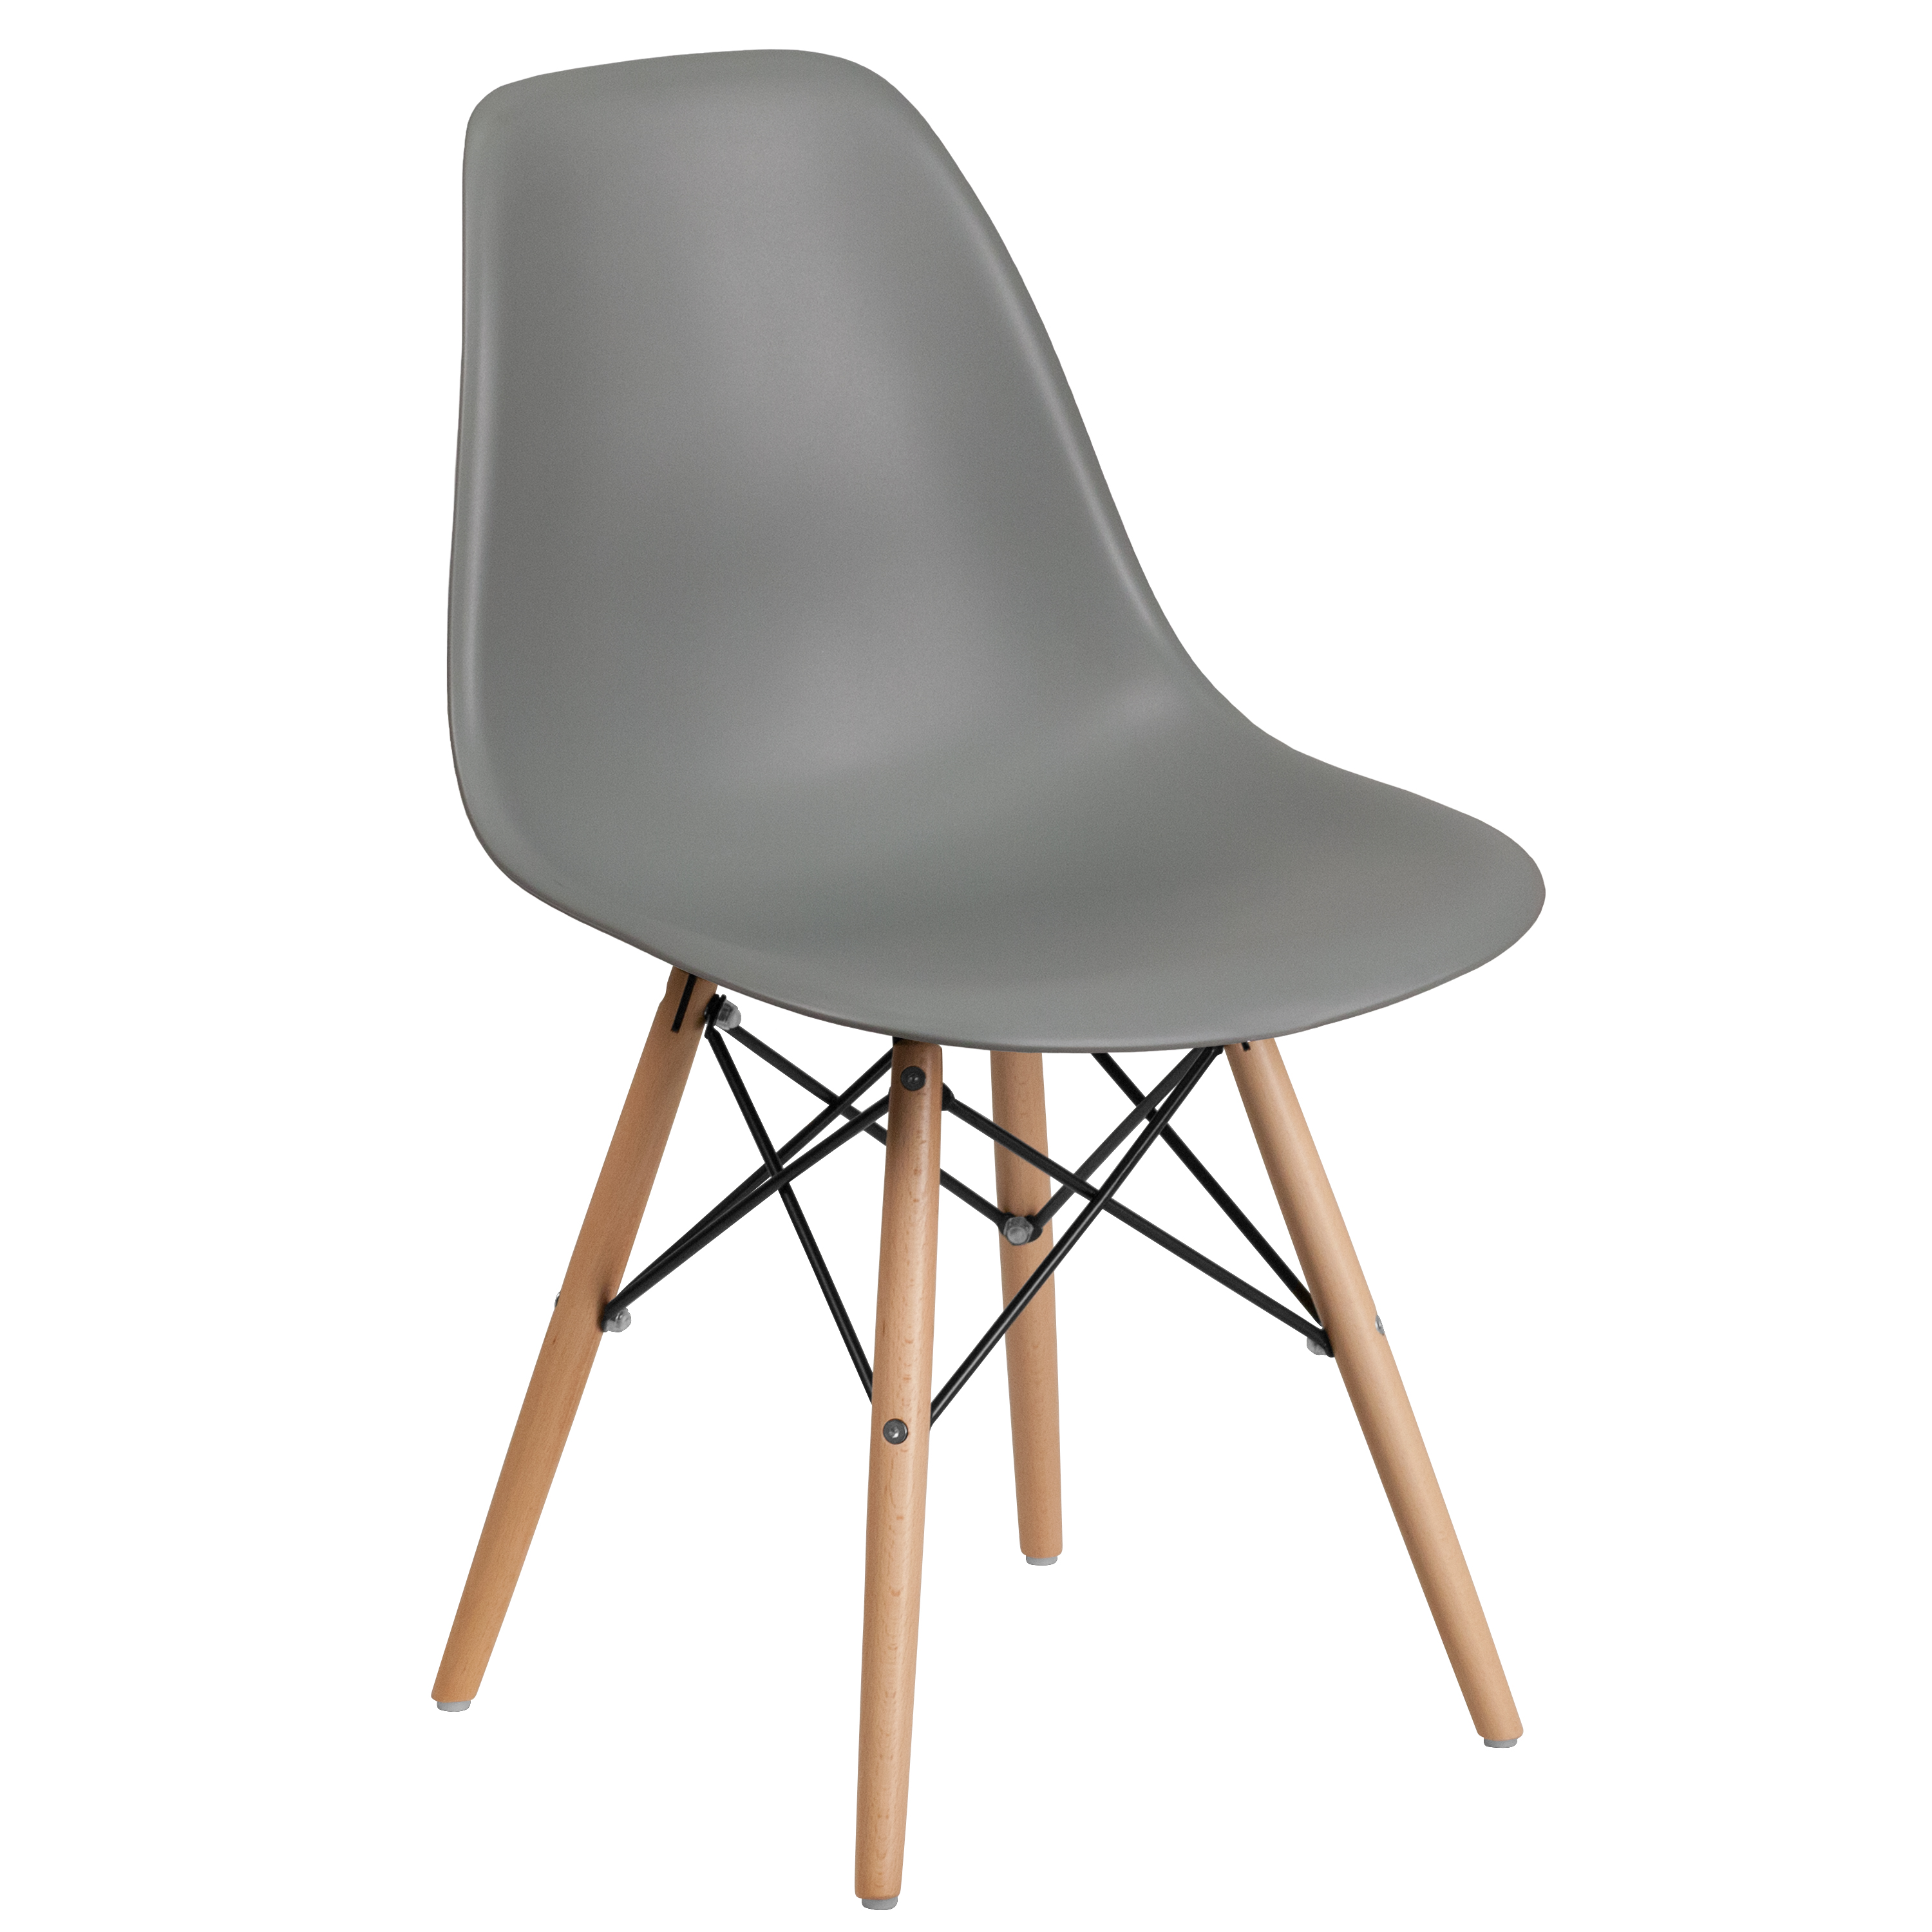 Flash Furniture FH-130-DPP-GY-GG Elon Series Moss Gray Plastic Chair with Wooden Legs